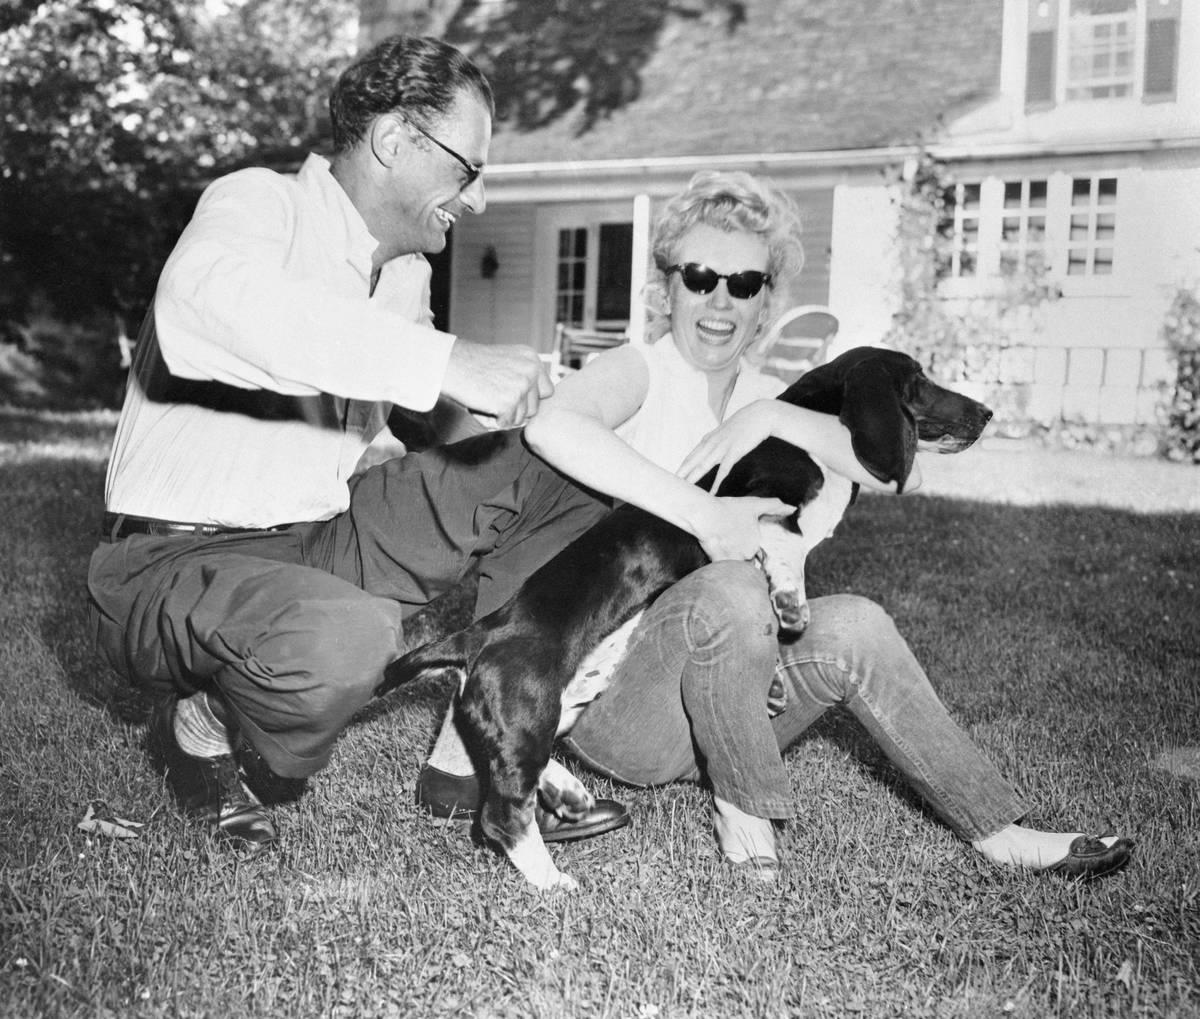 <p>Marilyn Monroe's Hollywood career had nearly hit its dazzling peak when she married American playwright Arthur Miller in 1956. After the wedding, the starlet and her new hubby bought an impressive sprawling estate in Roxbury, Connecticut. </p> <p>It was one of three properties that the two shared together and boasted 325 acres of land. Allegedly, they chose the secluded mansion at Marilyn's request to escape the Hollywood lifestyle. </p>